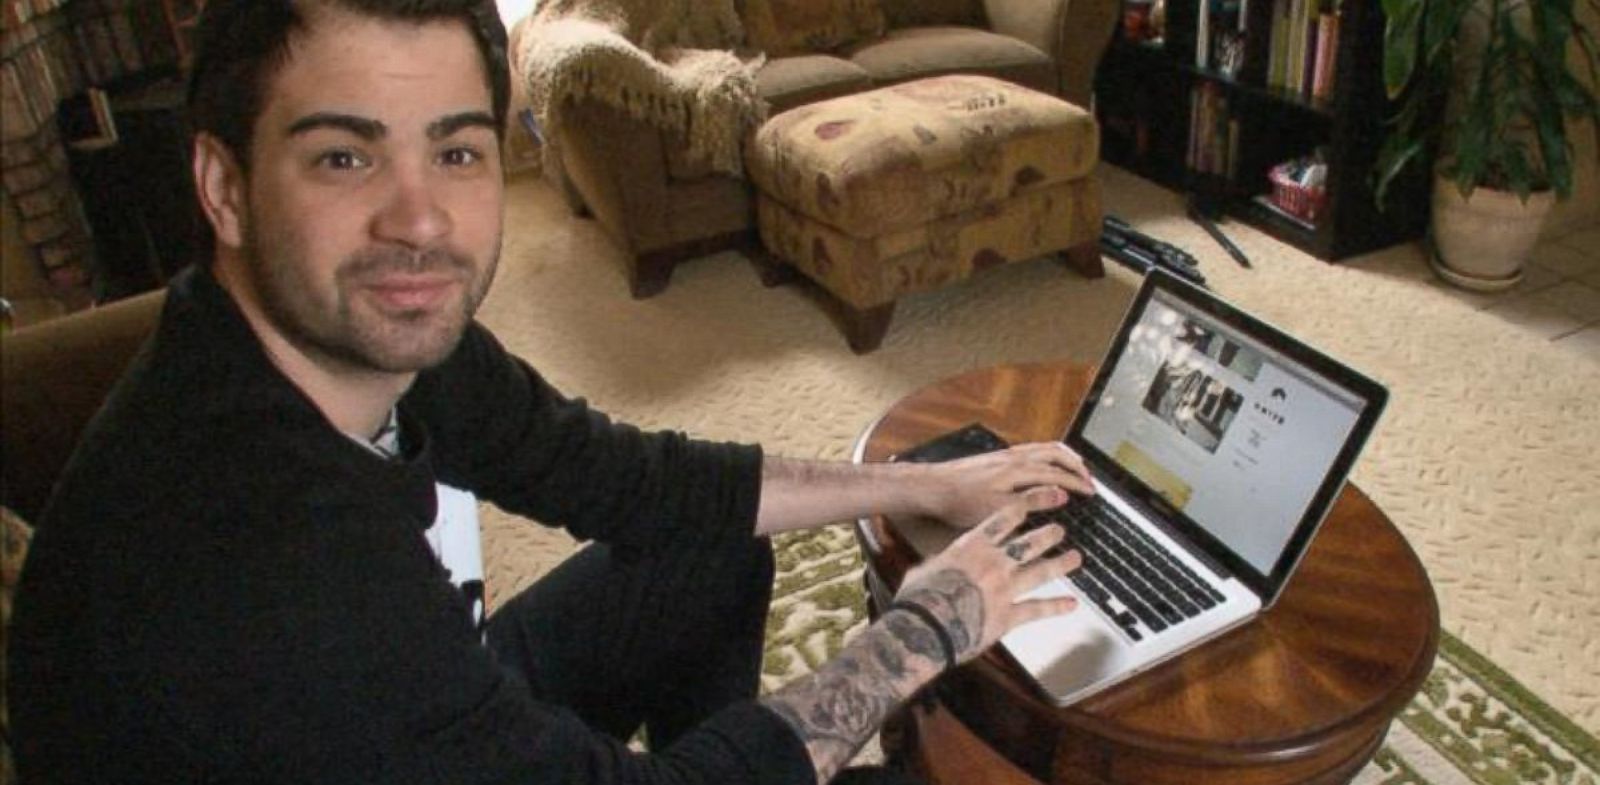 Is Anyone Up? Founder Hunter Moore is back online, making music and writing a book